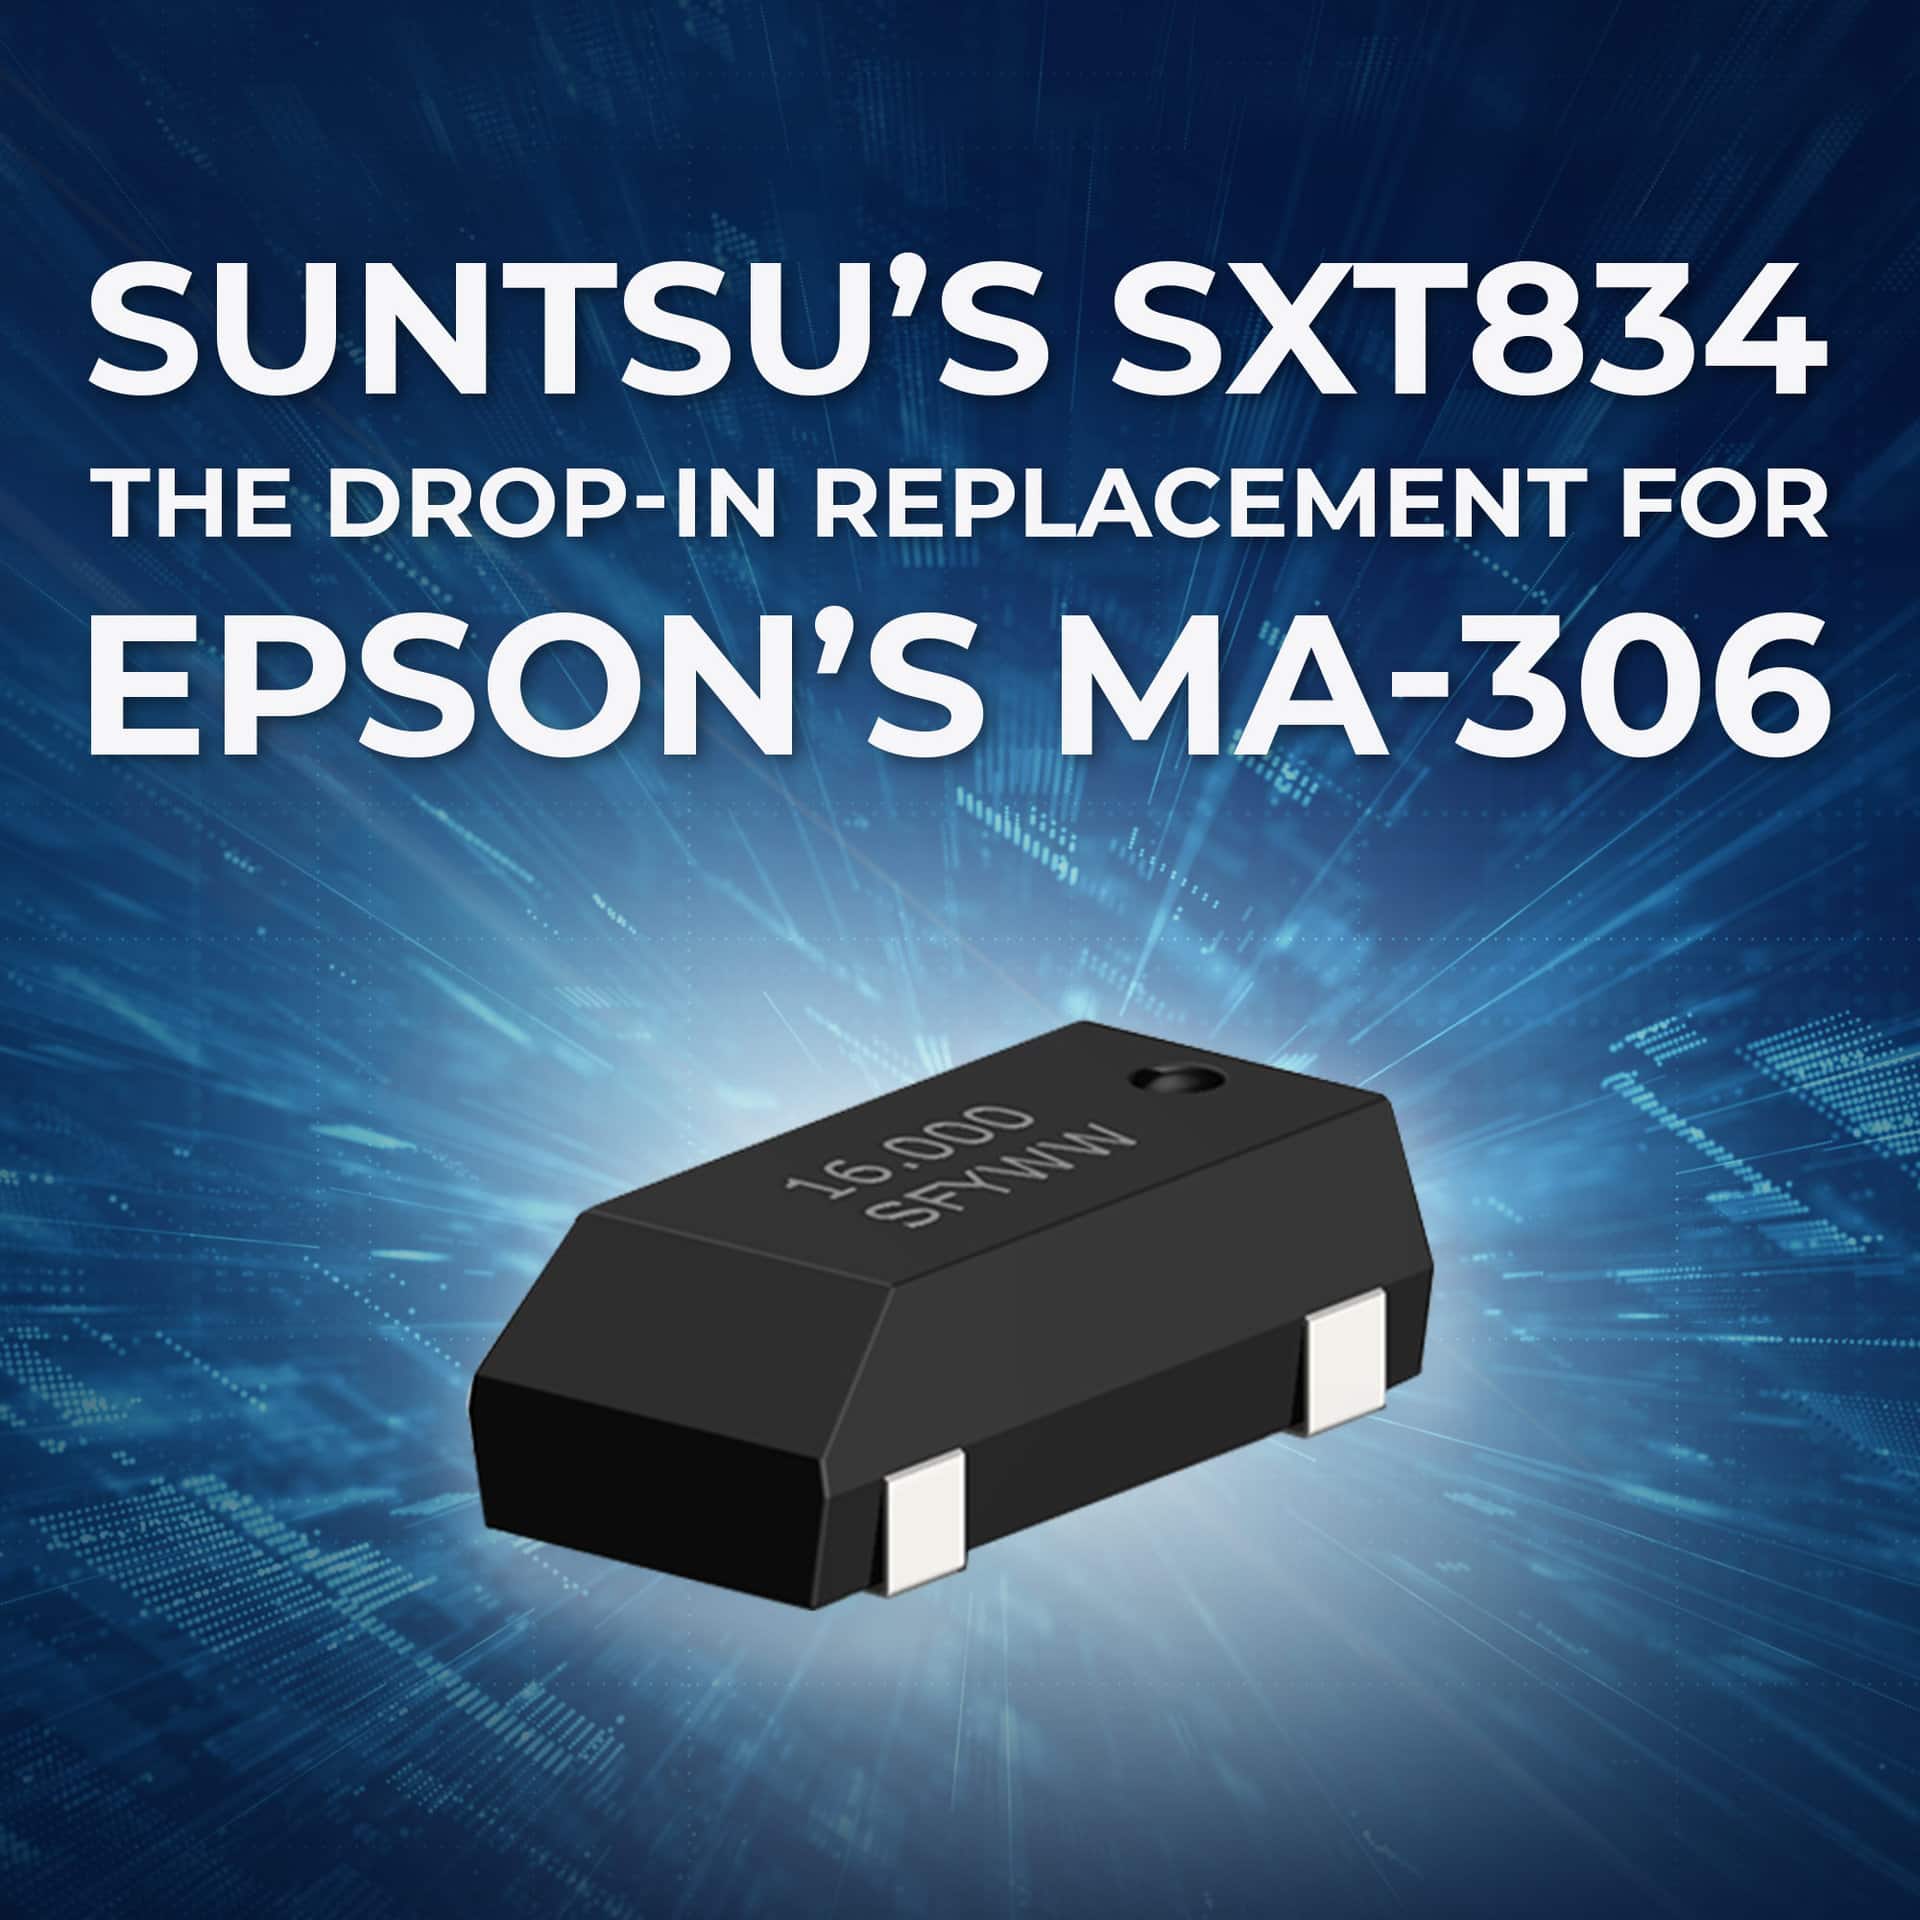 Suntsu’s SXT834: The Drop-In Replacement to Epson’s MA-306